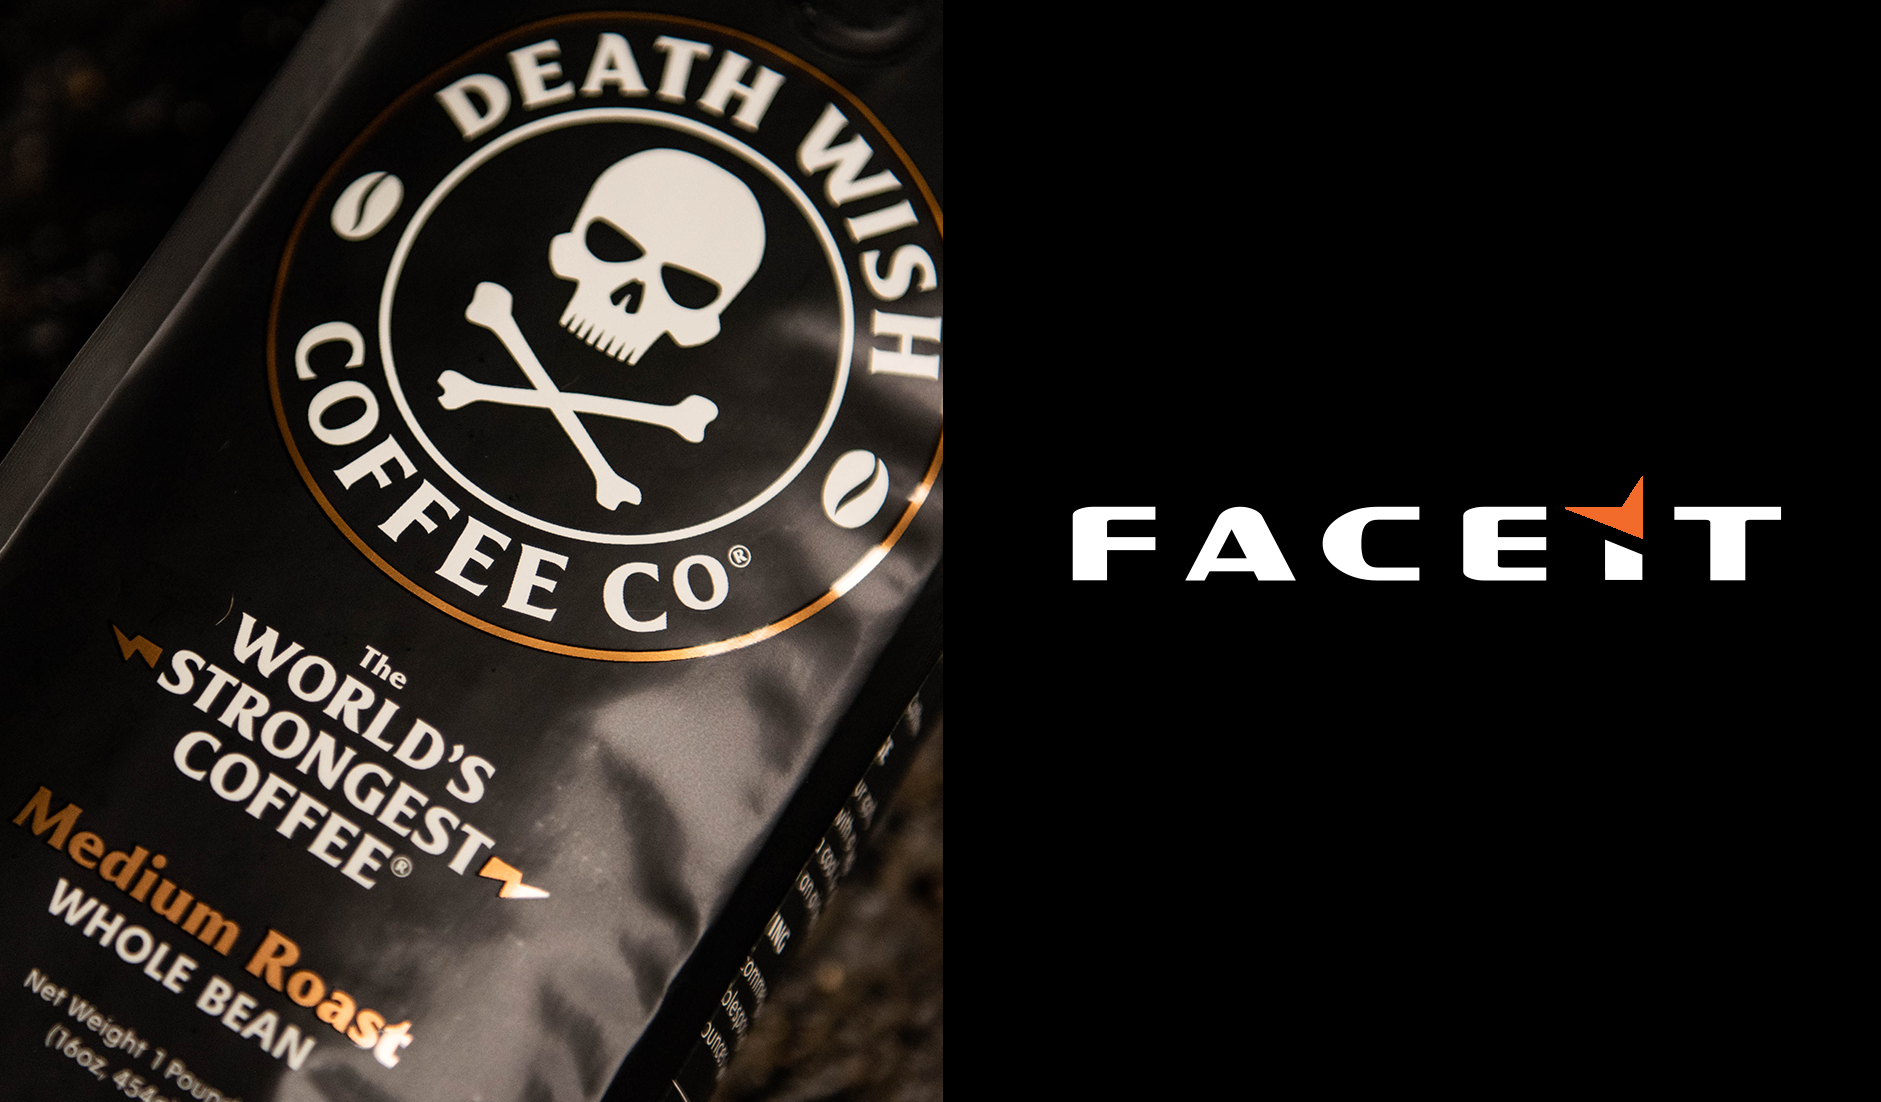 my stomach hurts after drinking coffee - Death Wish Coffee Co. Death Wish Ground Coffee Bundle Deal, The Worlds  Strongest Coffee, Fair Trade and USDA Certified Organic - 2 lb